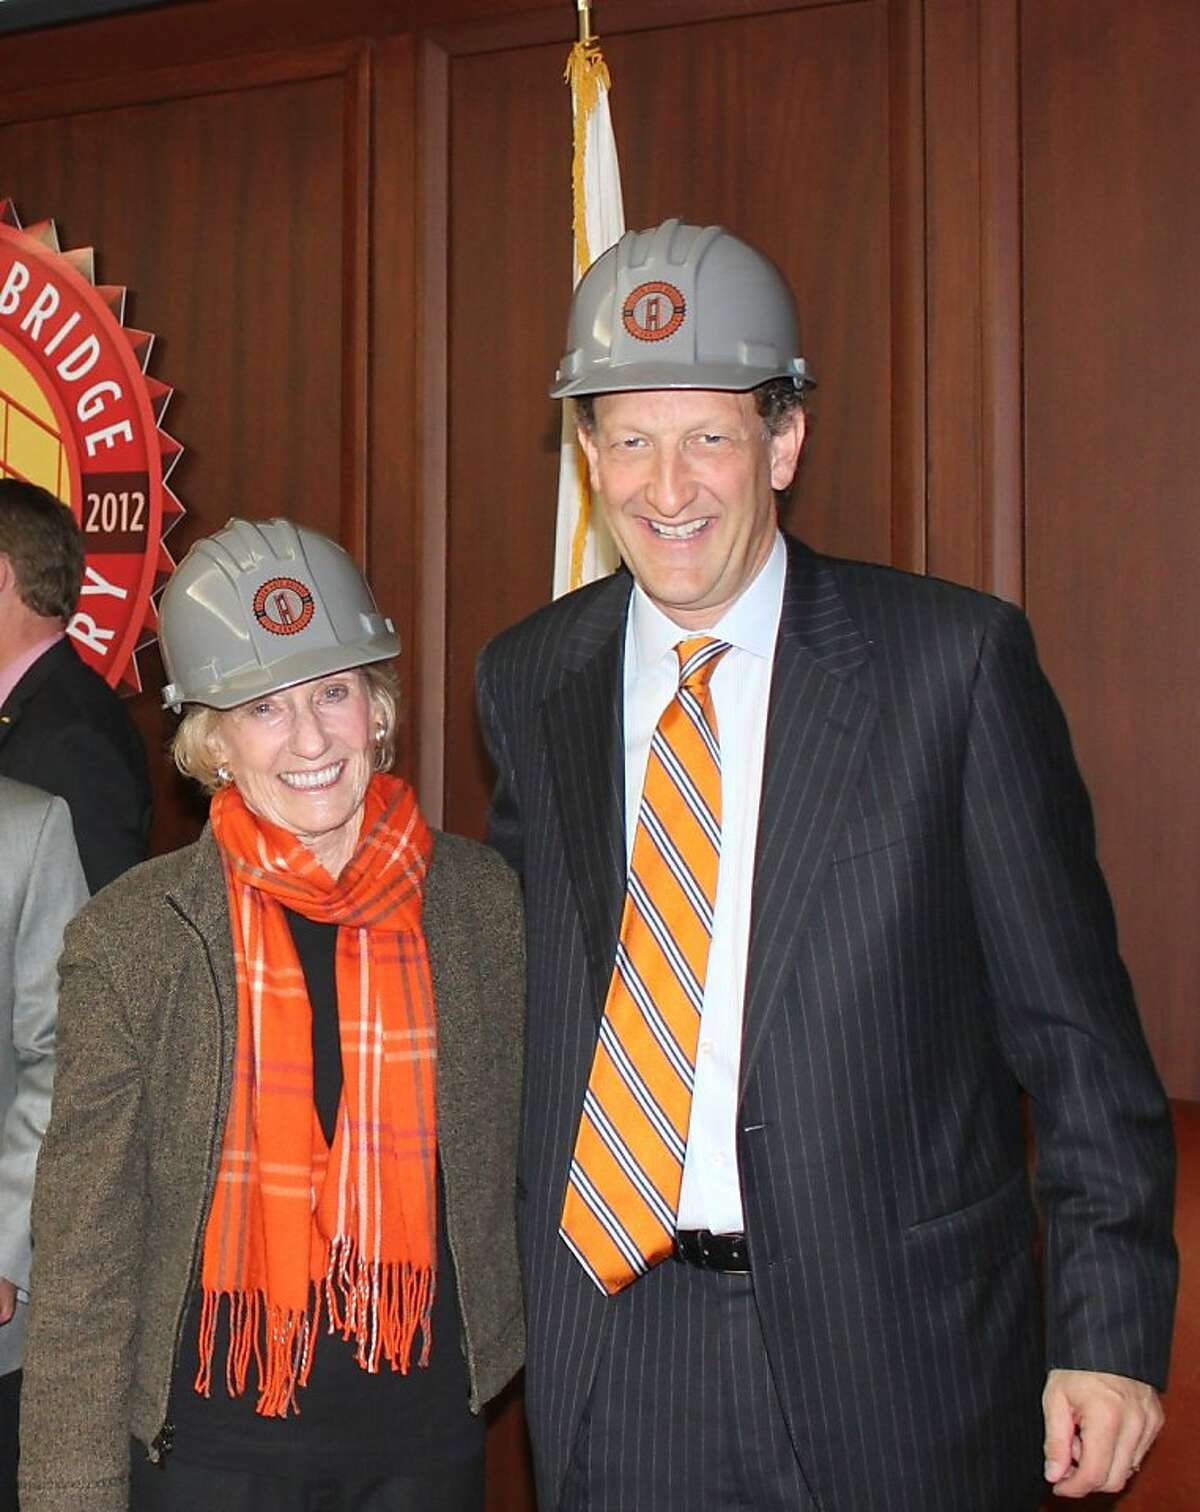 Golden Gate Bridge 75th Anniversary chairs Presidio Trust President Nancy Bechtle and SF Giants President Larry Baer. May 2011. By Mary Currie.